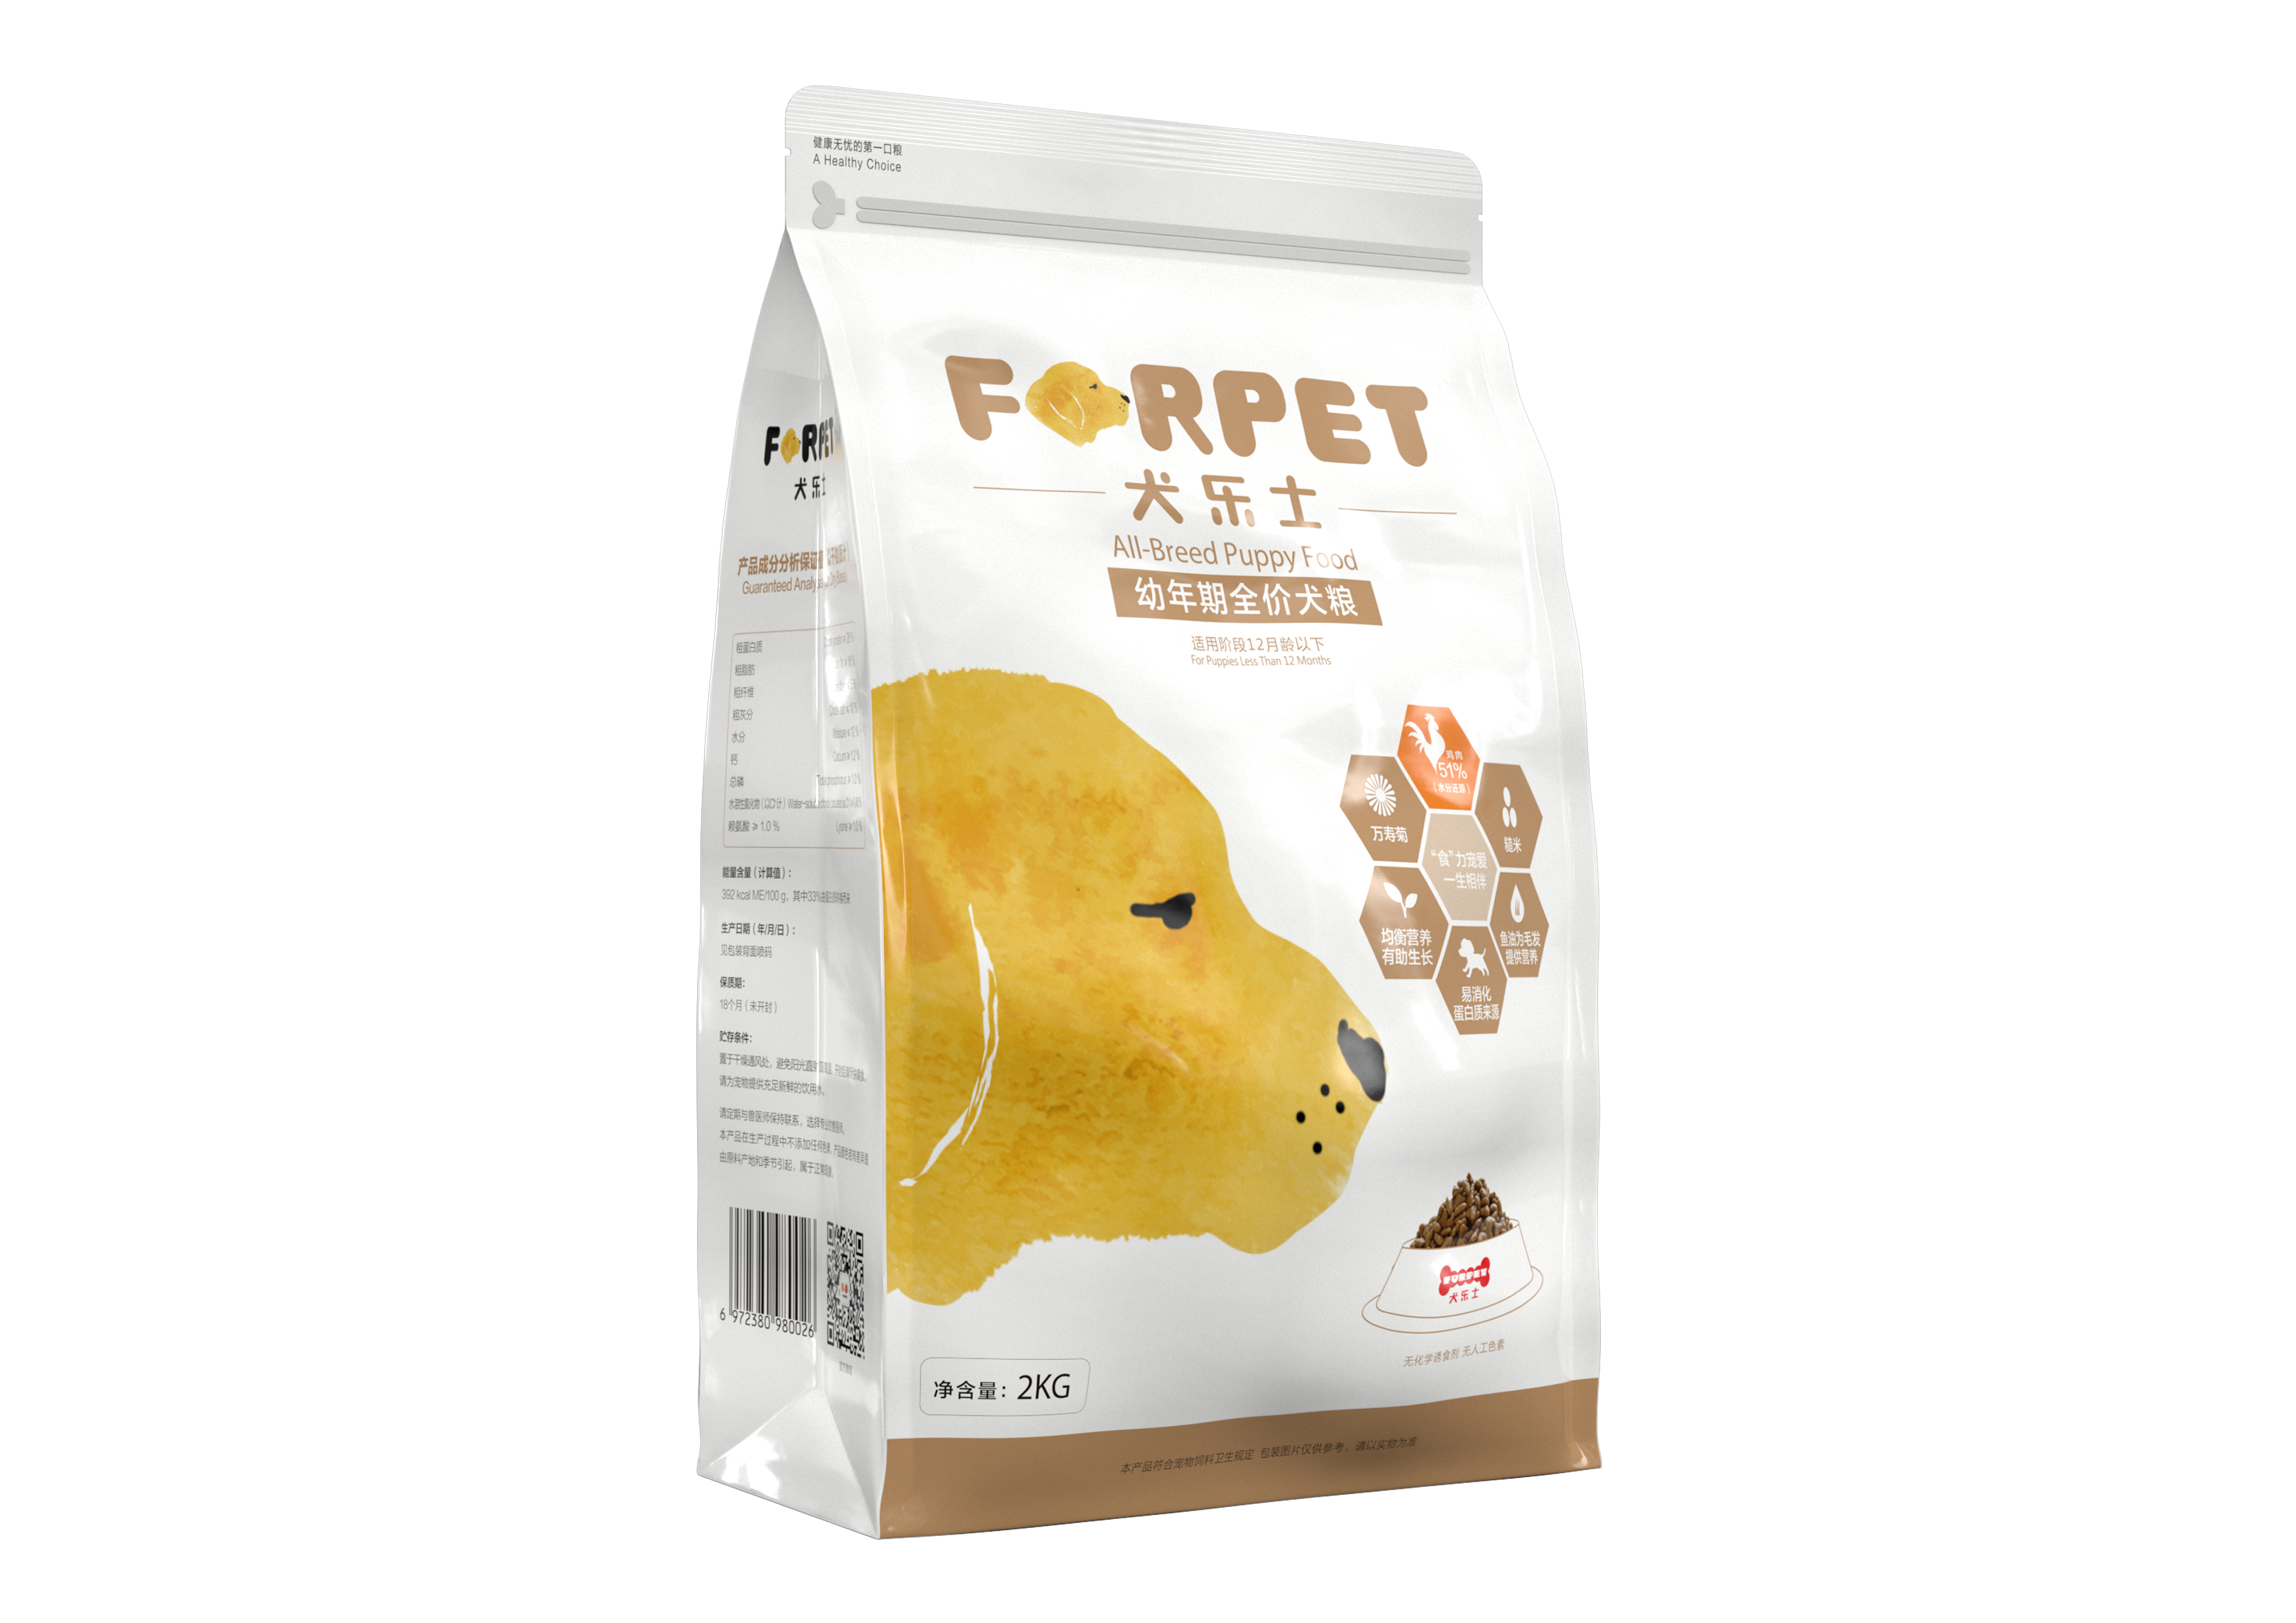 MUSE Design Winners - Forpet Dog Food